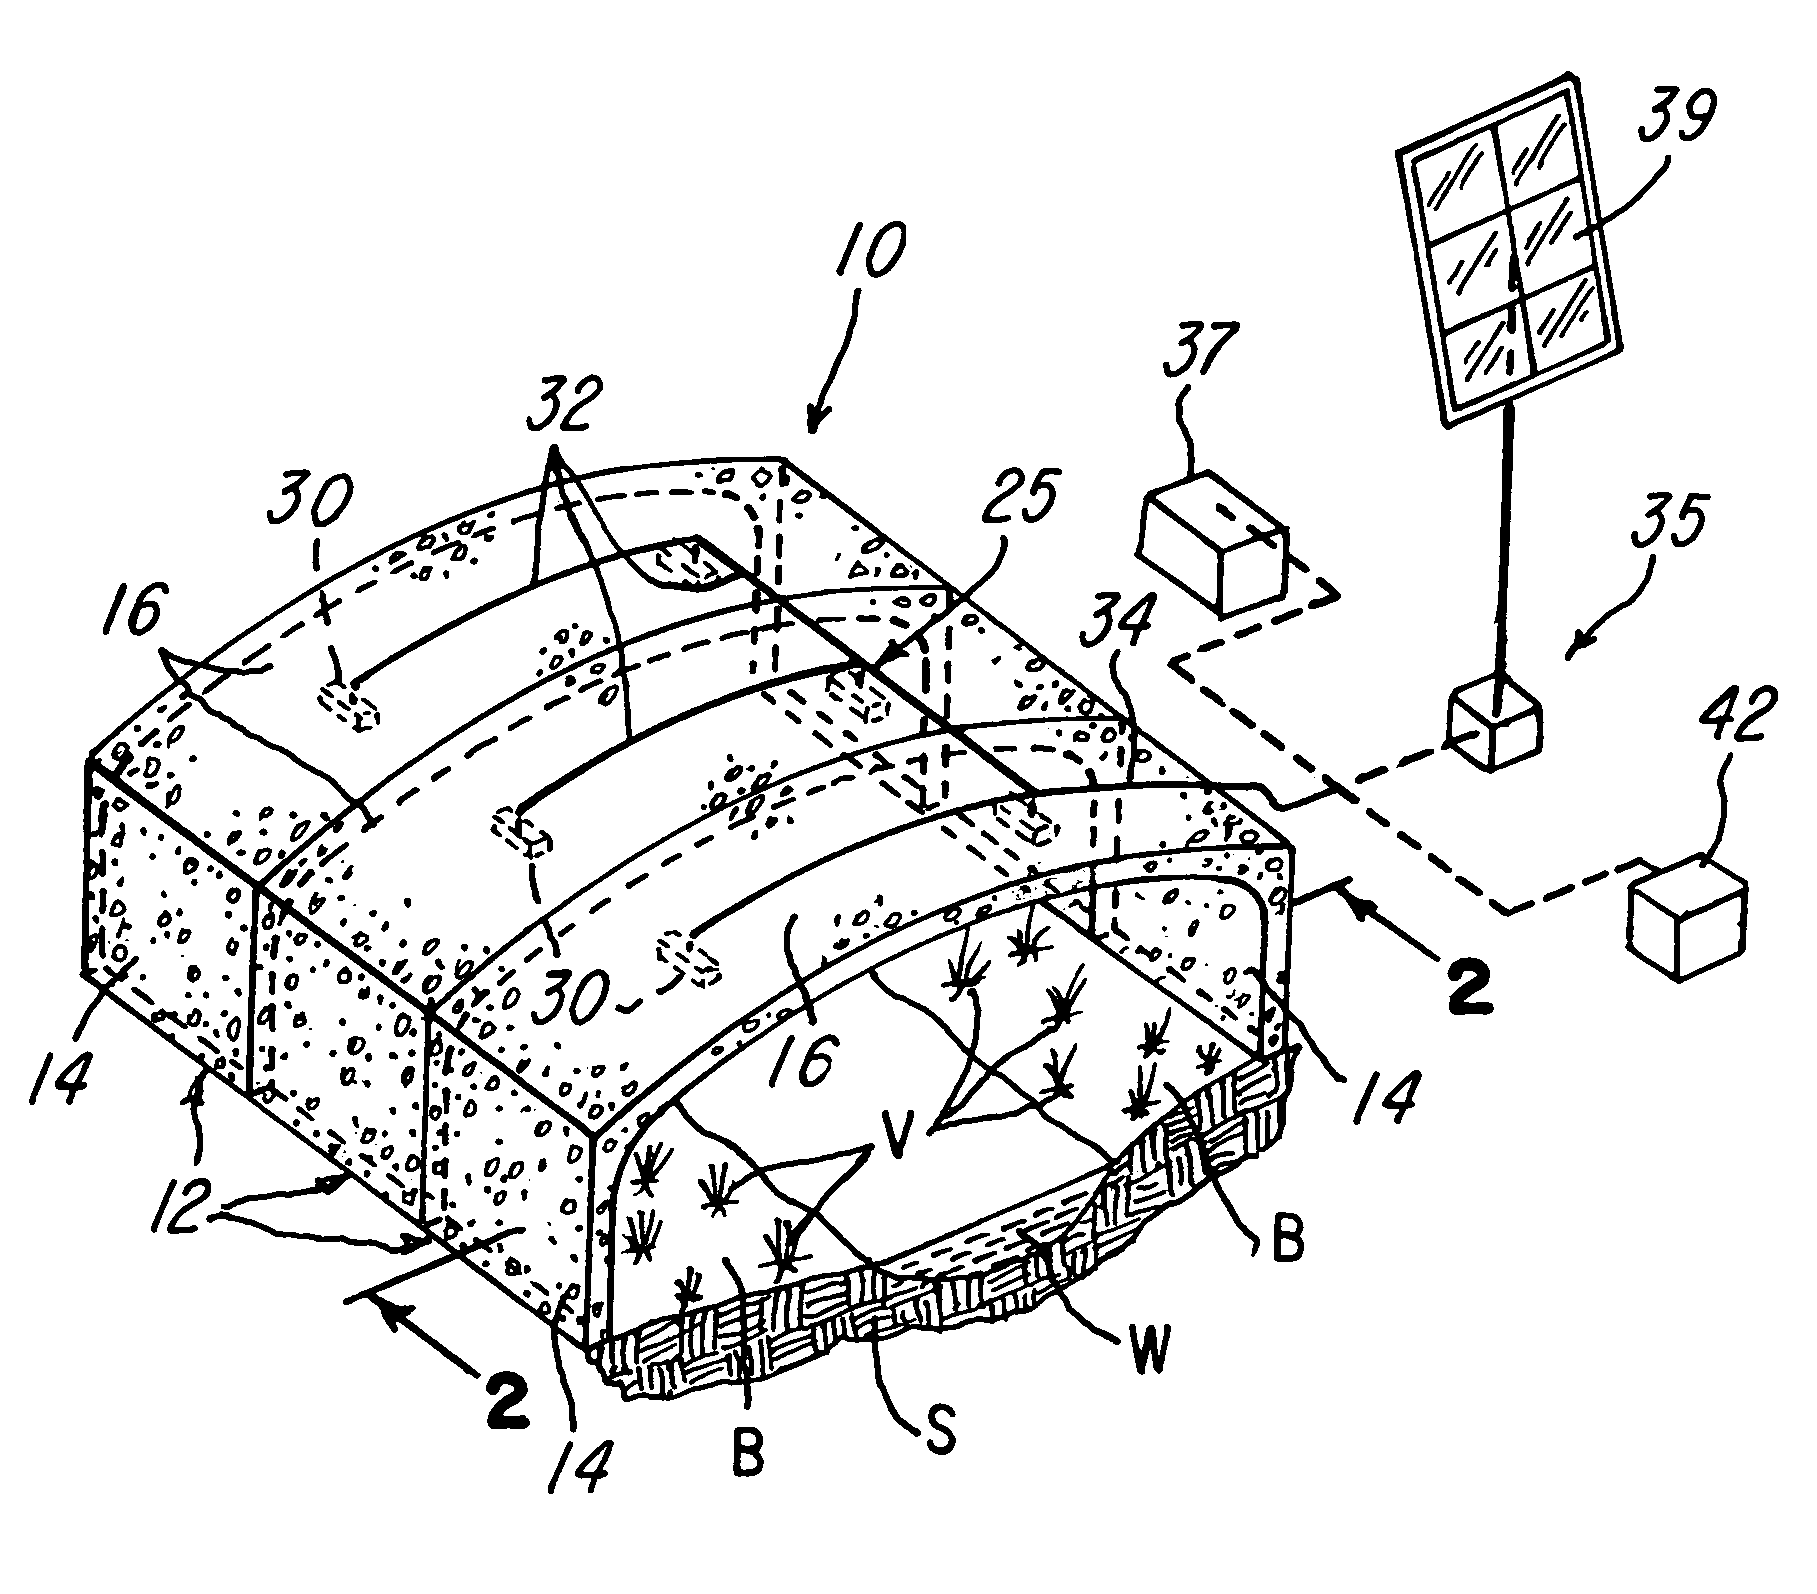 Method for improving the environment within soil embedded culvert and bridge systems